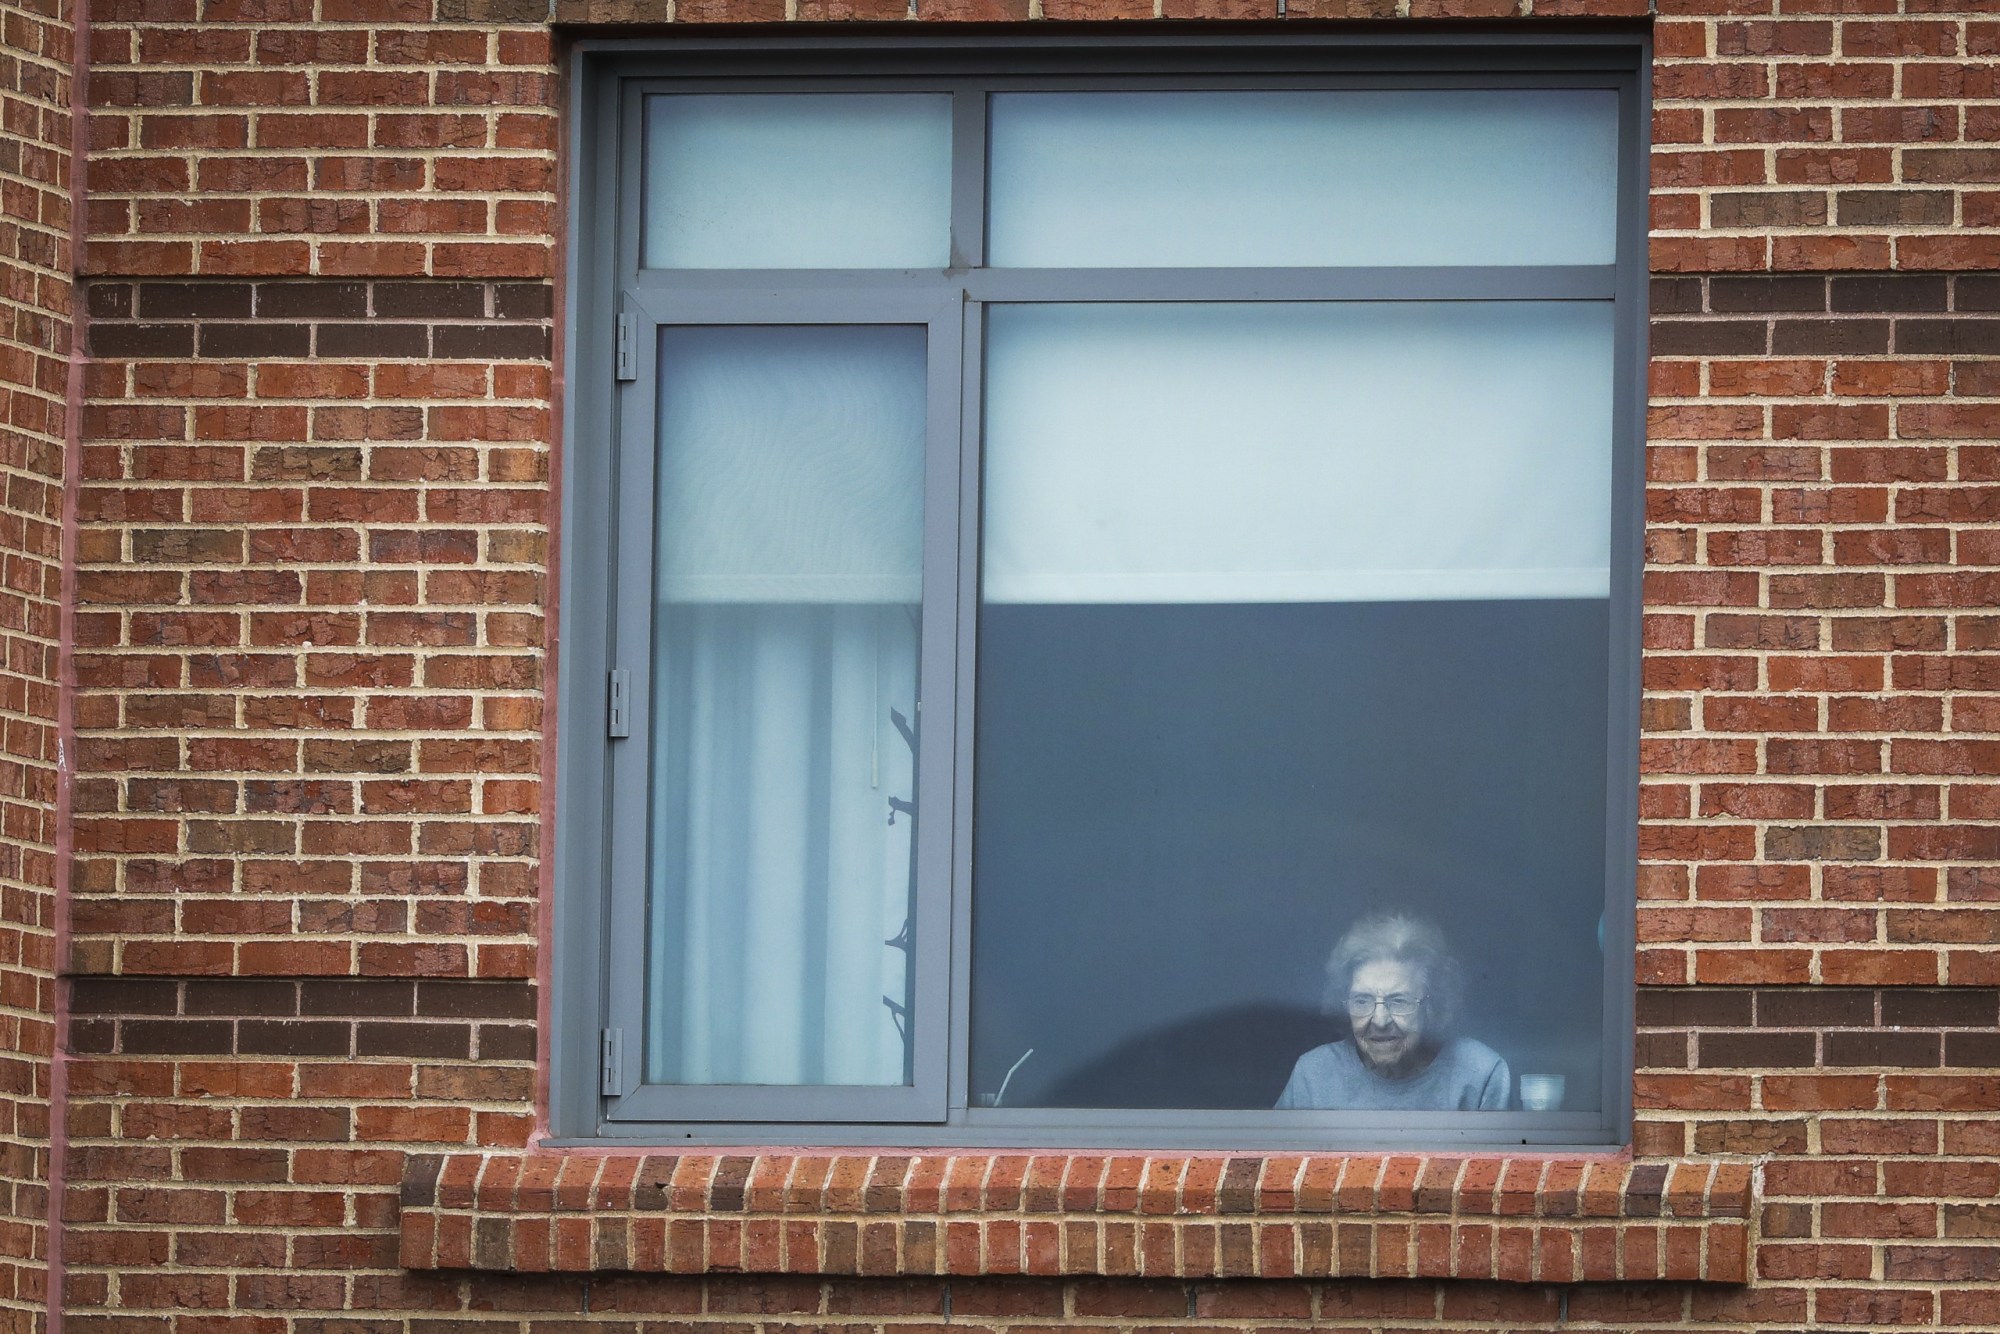 A resident at the Leonard Florence Center for Living watches from outside of her window as a three-piece-band performs from down below in Boston on March 20, 2020. (Getty/Erin Clark)